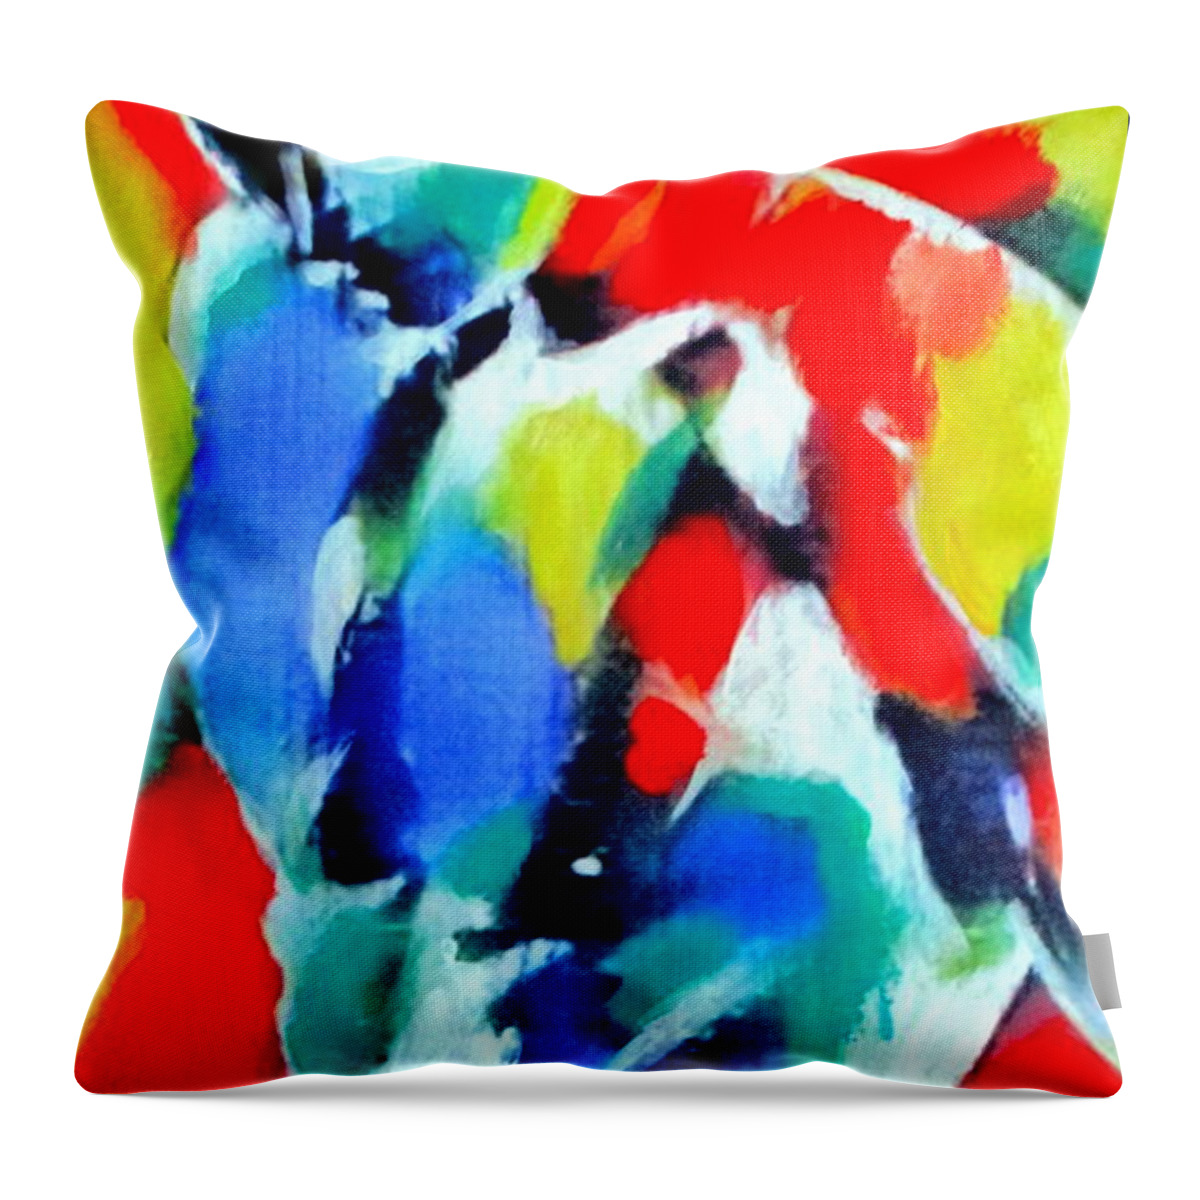 Male Nude Art Throw Pillow featuring the painting Male Figure Study by Helena Wierzbicki